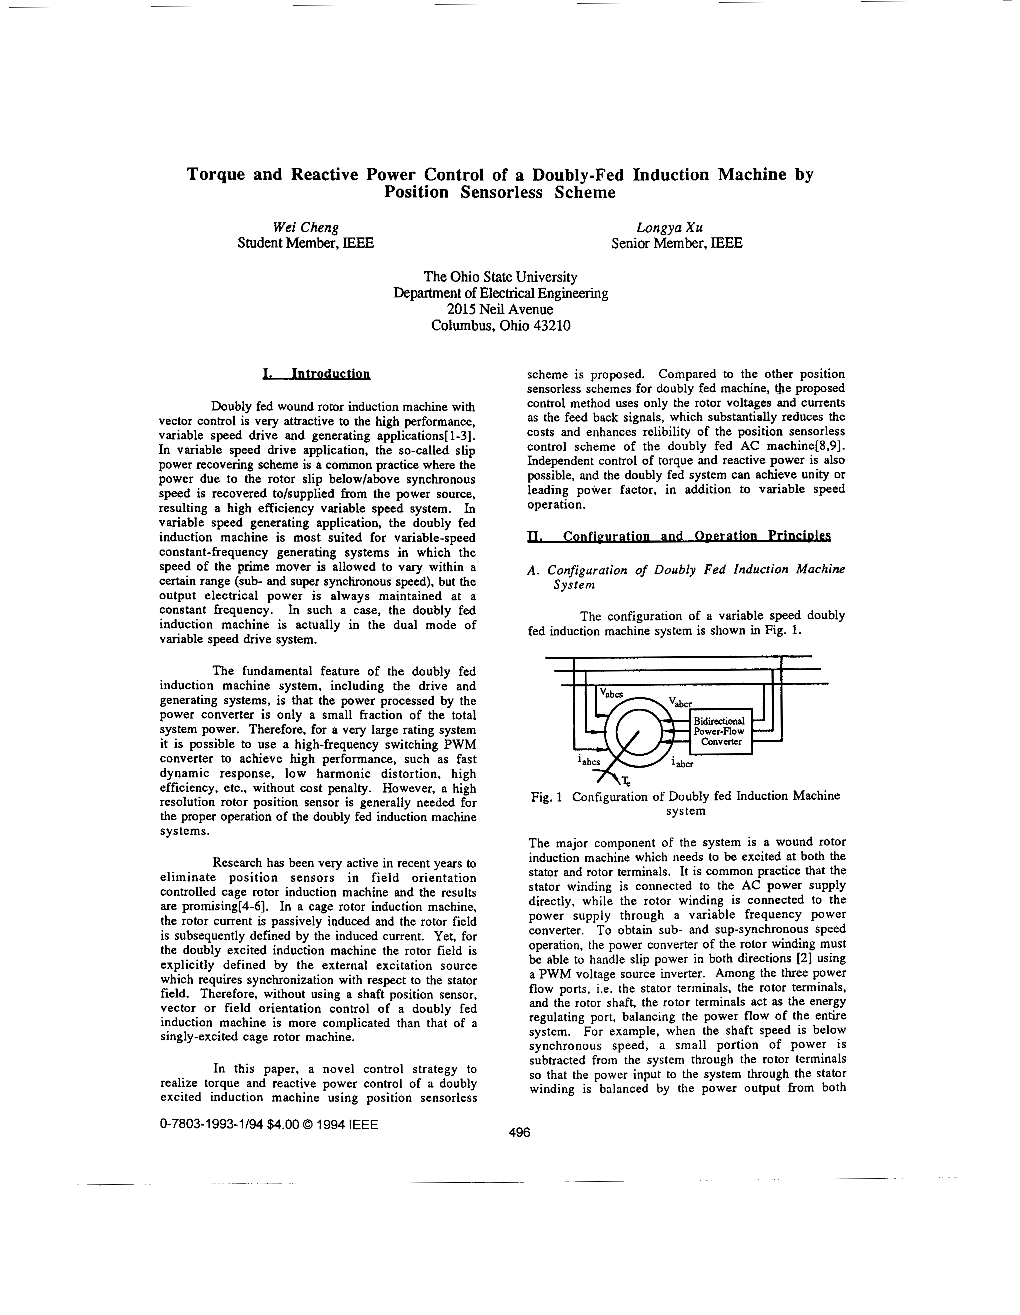 Torque and Reactive Power Control of a Doubly-Fed Induction Machine by Position Sensorless Scheme